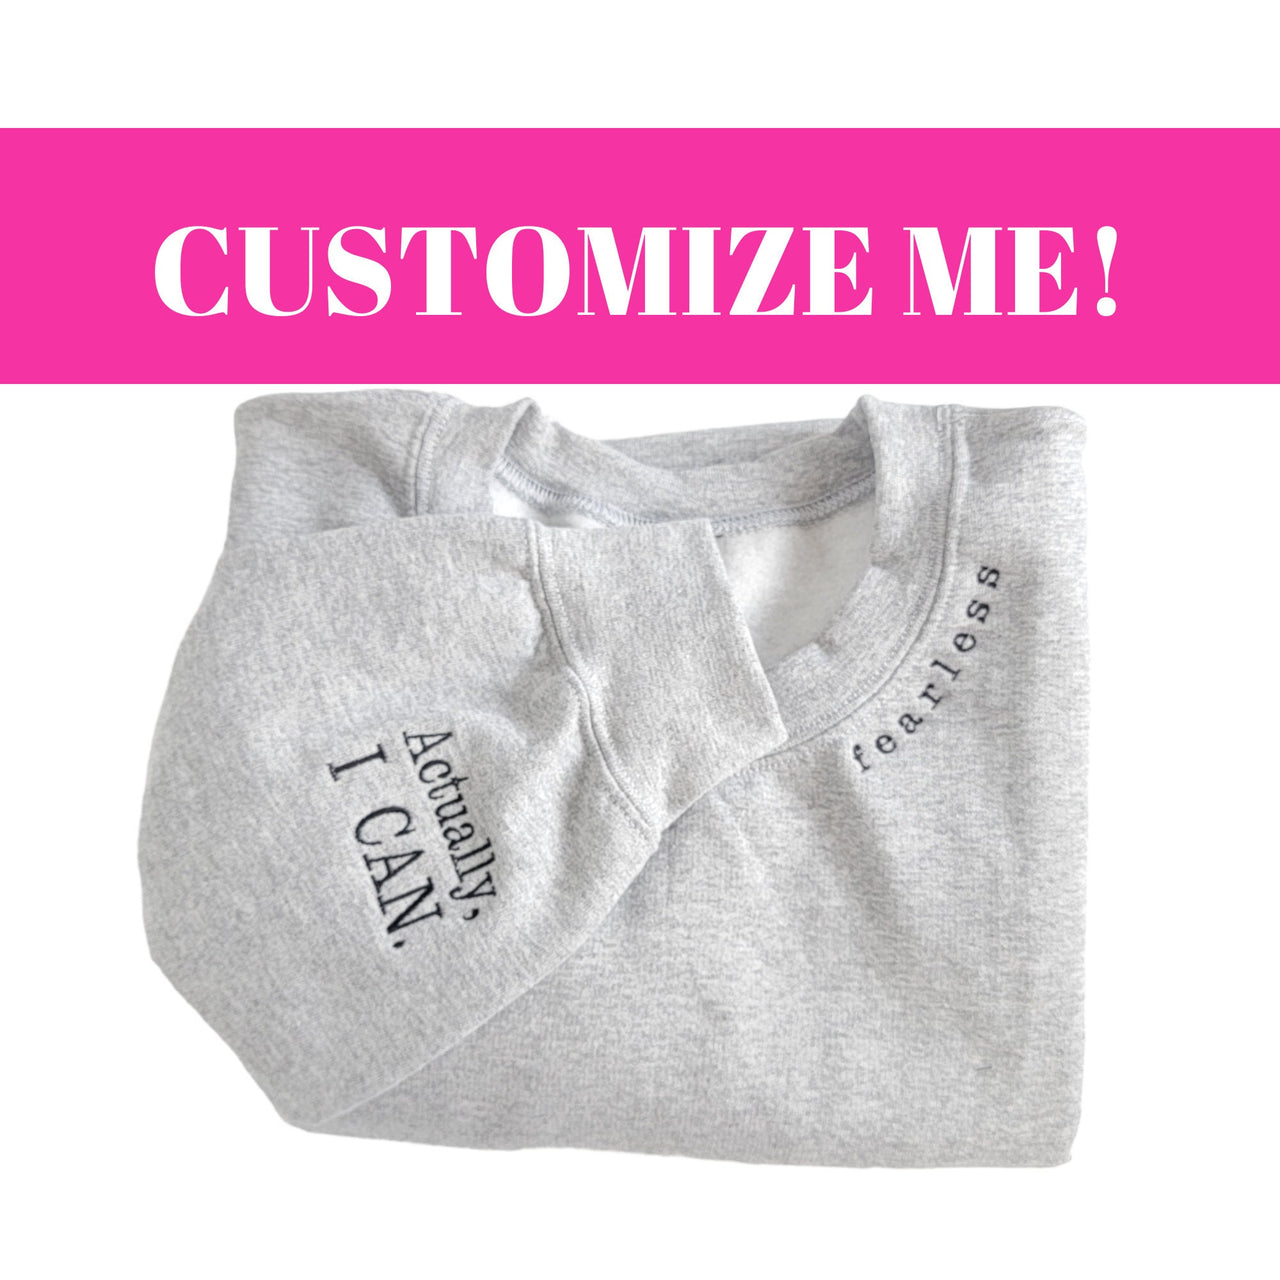 Custom Embroidered Sweatshirt For Women or Men - Neckline Embroidered Sleeve - Gift for Her - Monogrammed Sweatshirt - Trendy Sweatshirt